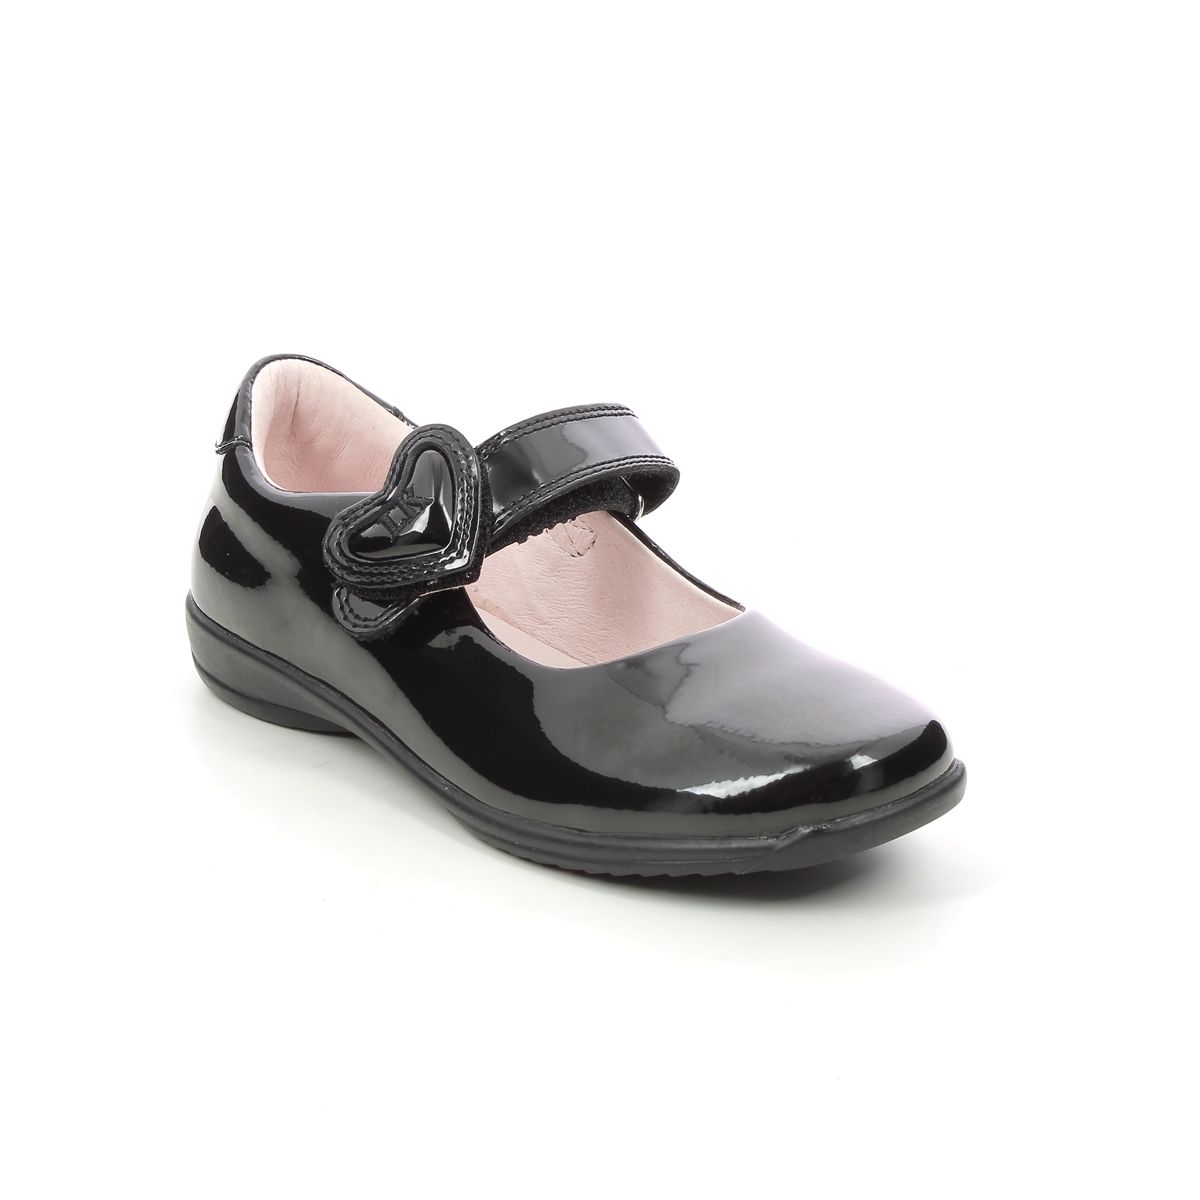 Lelli Kelly Colourissima Heart F Fit Black patent Kids Girls shoes LK8500-DB01 in a Plain  in Size 28